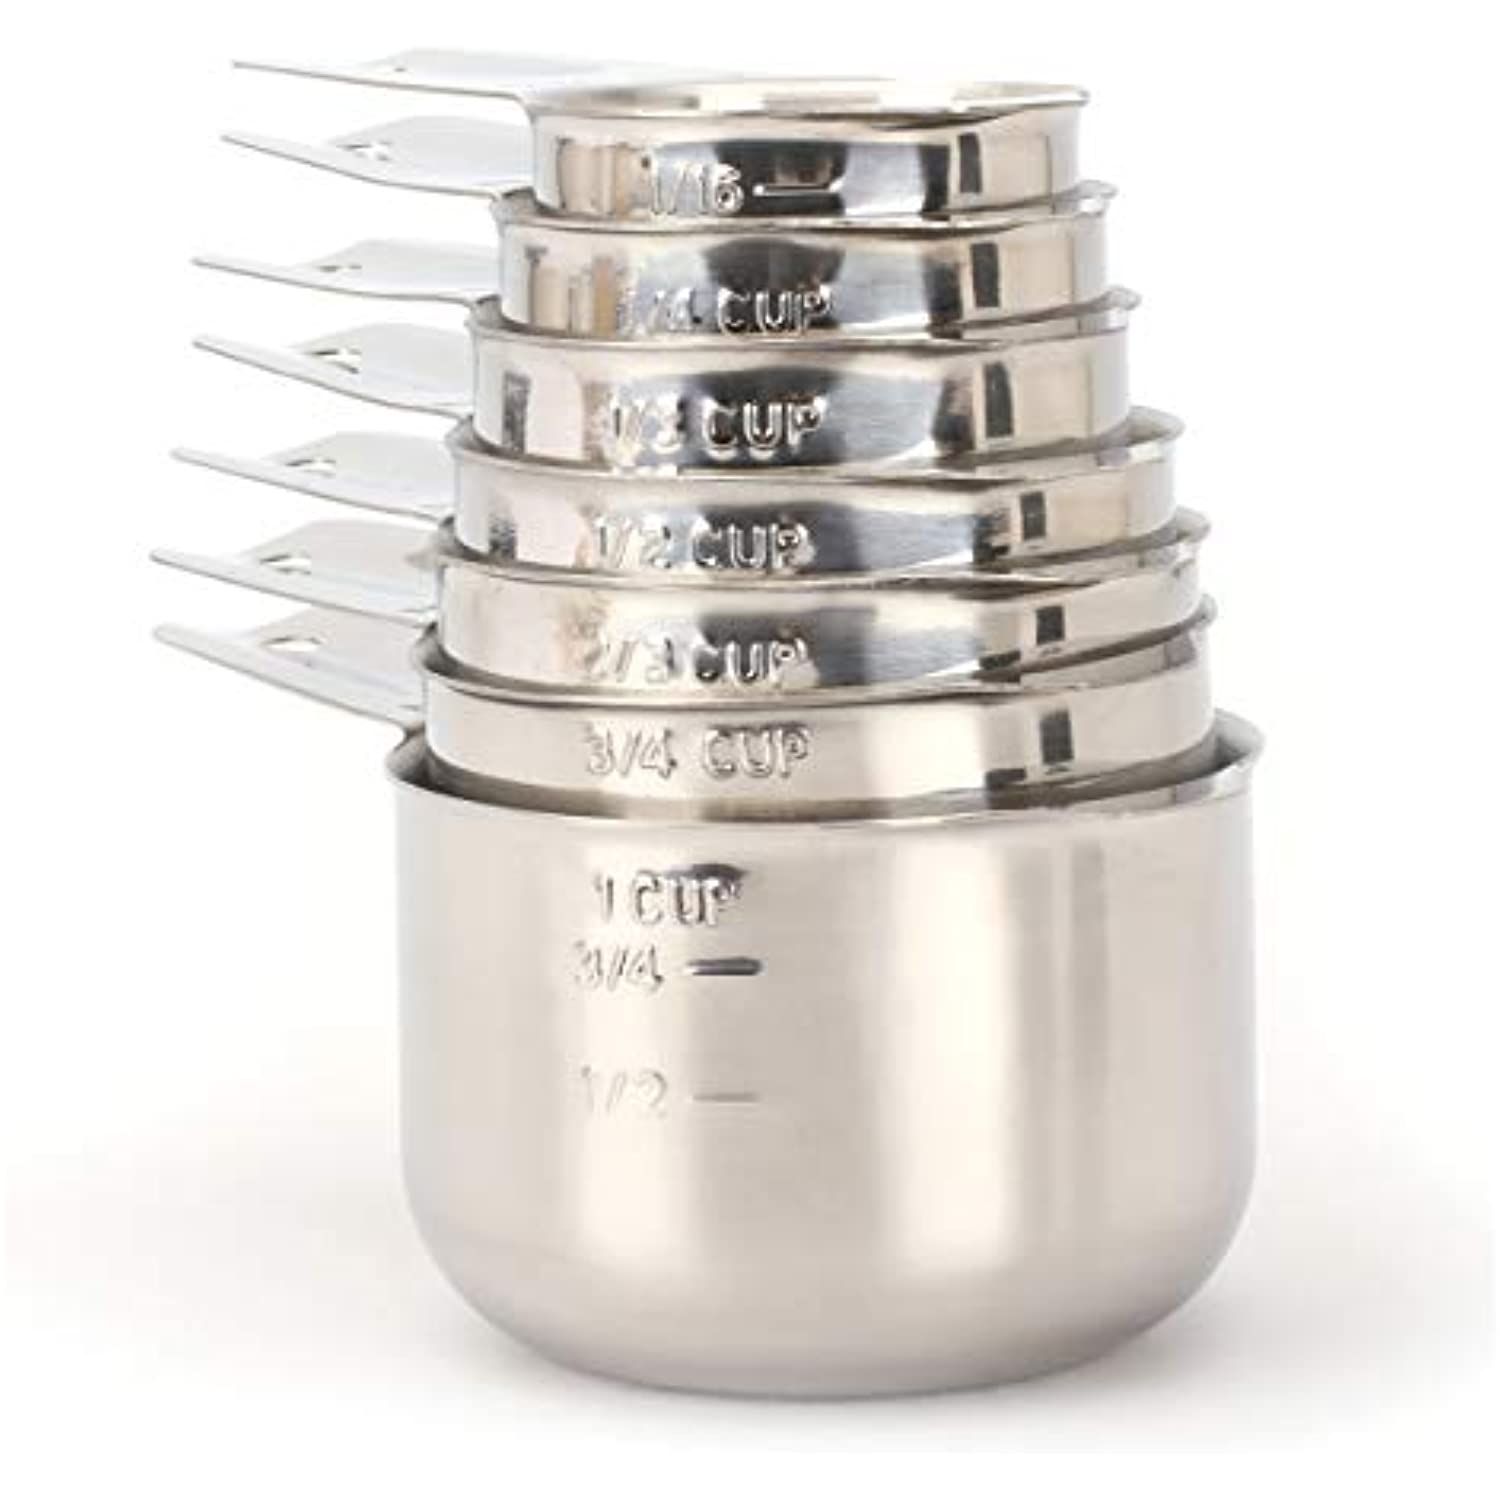 2LB Depot Measuring Cups, Premium 18/8 Stainless Steel, Stackable, Accurate Measuring Cup Design,... | Walmart (US)